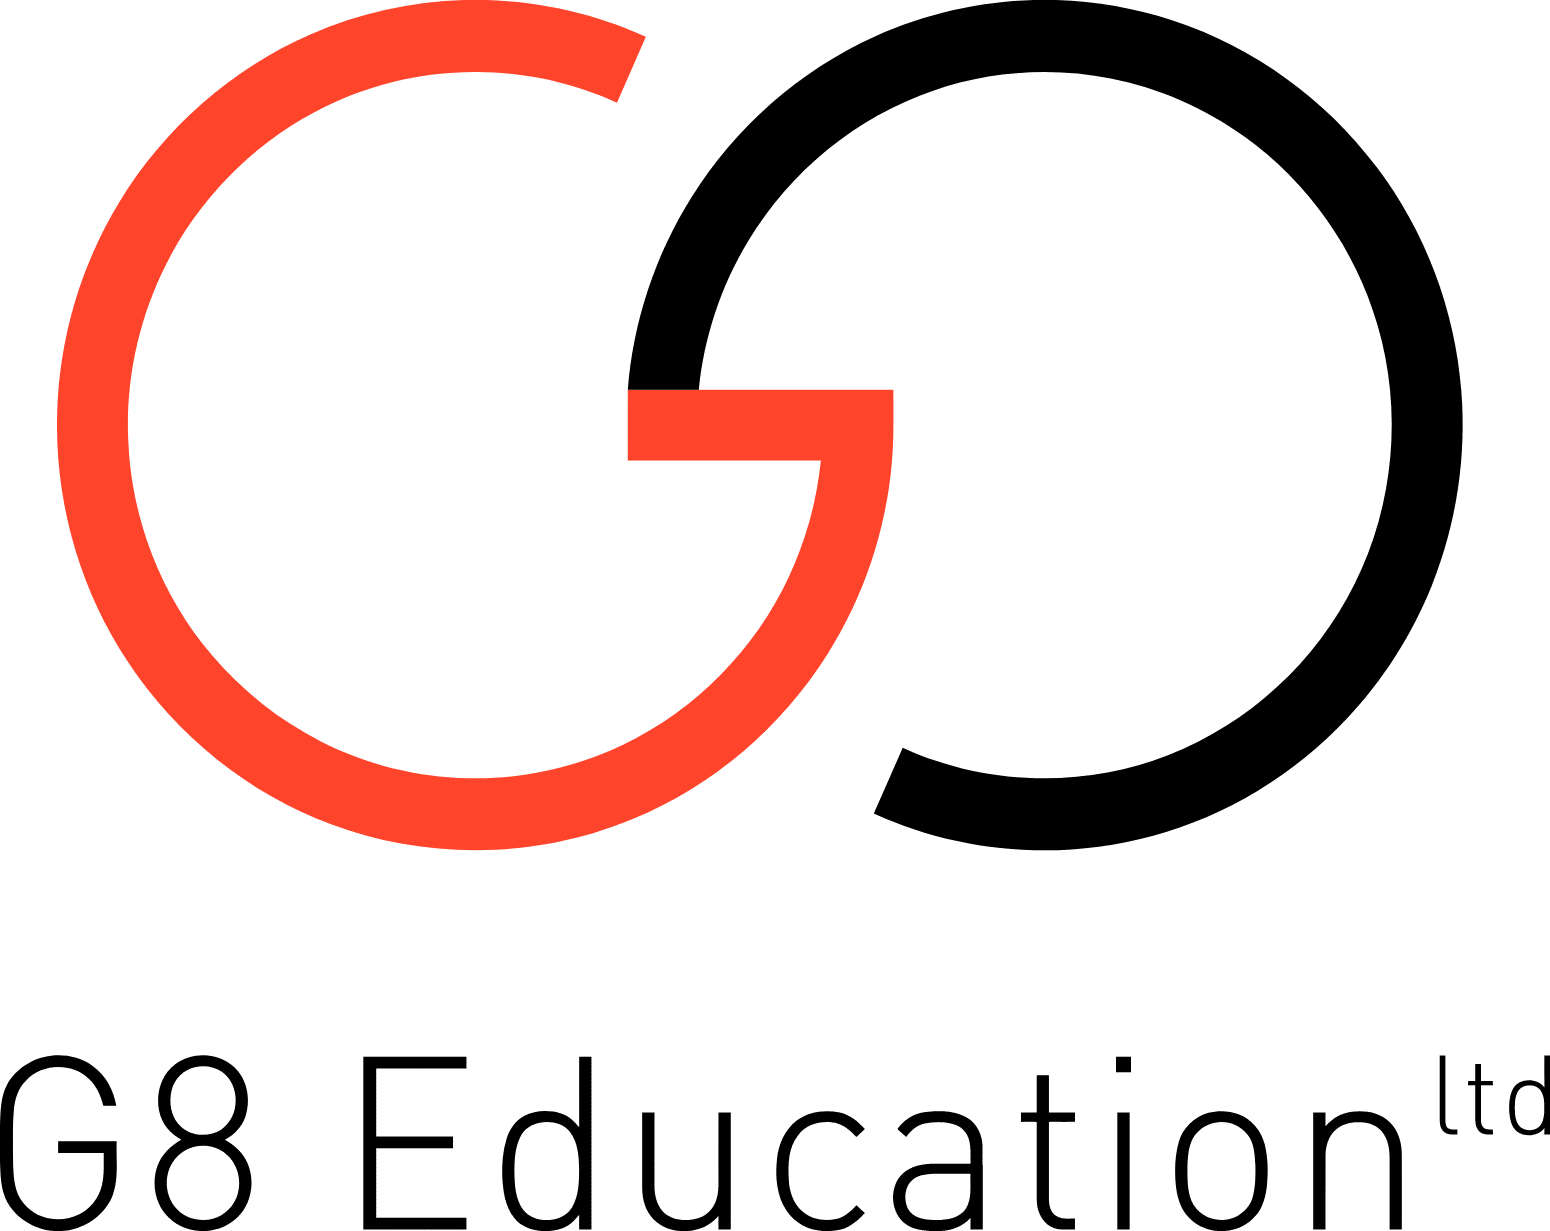 G8 Education logo - Creating Foundations for Lifelong Learning featuring bold letters "G8 Education" with accompanying "ltd" on a white background. Additional text "G8 Education" below provides information about the company's early learning centers. Non-English character "フ、" is displayed in a larger size towards the center-right of the image.